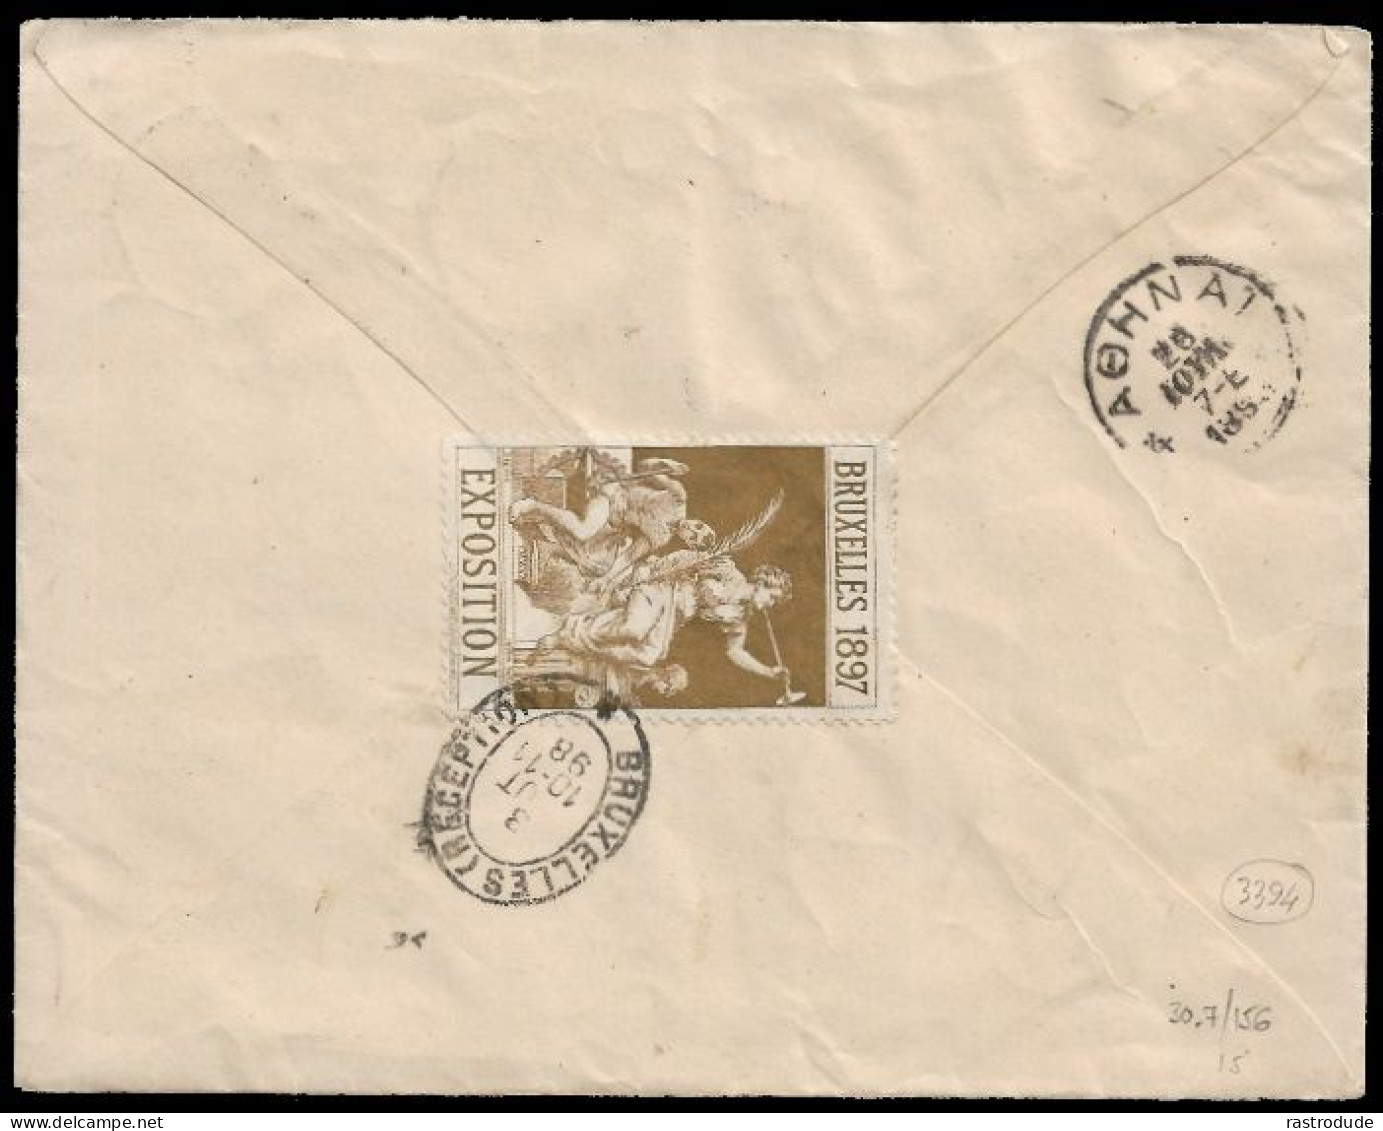 1898 BELGIUM 10C UPRATED REGISTERED POSTAL STATIONERY ENVELOPE EXPOSITION BRUXELLES 1897 TO GREECE - Covers